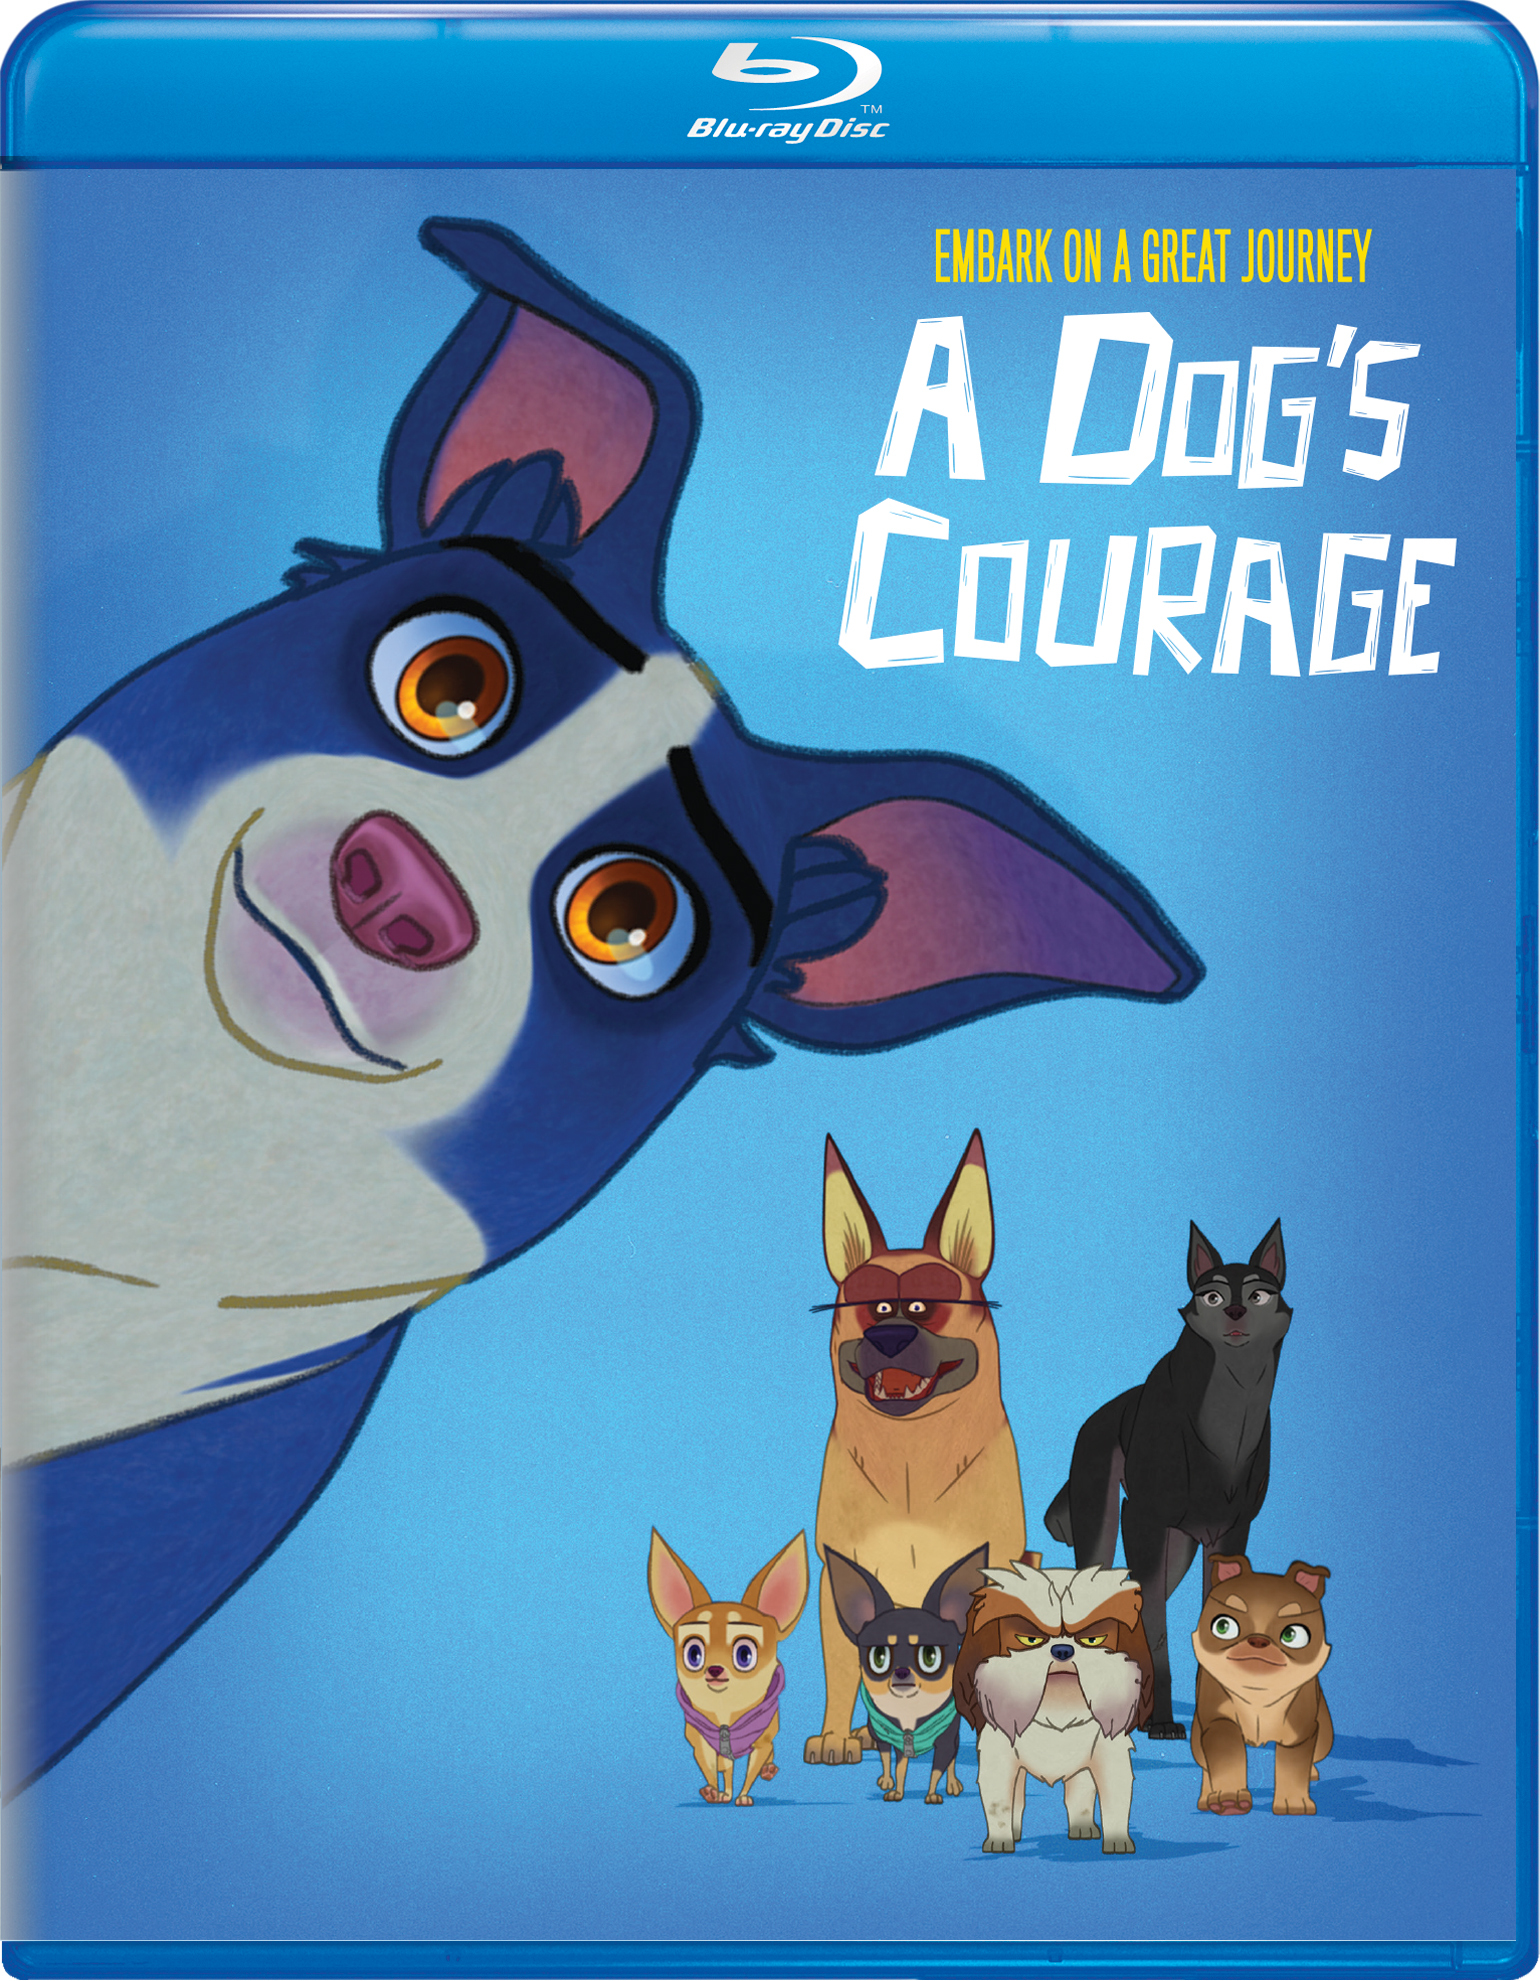 A Dog's Courage - Blu-ray [ 2020 ]  - Animation Movies On Blu-ray - Movies On GRUV